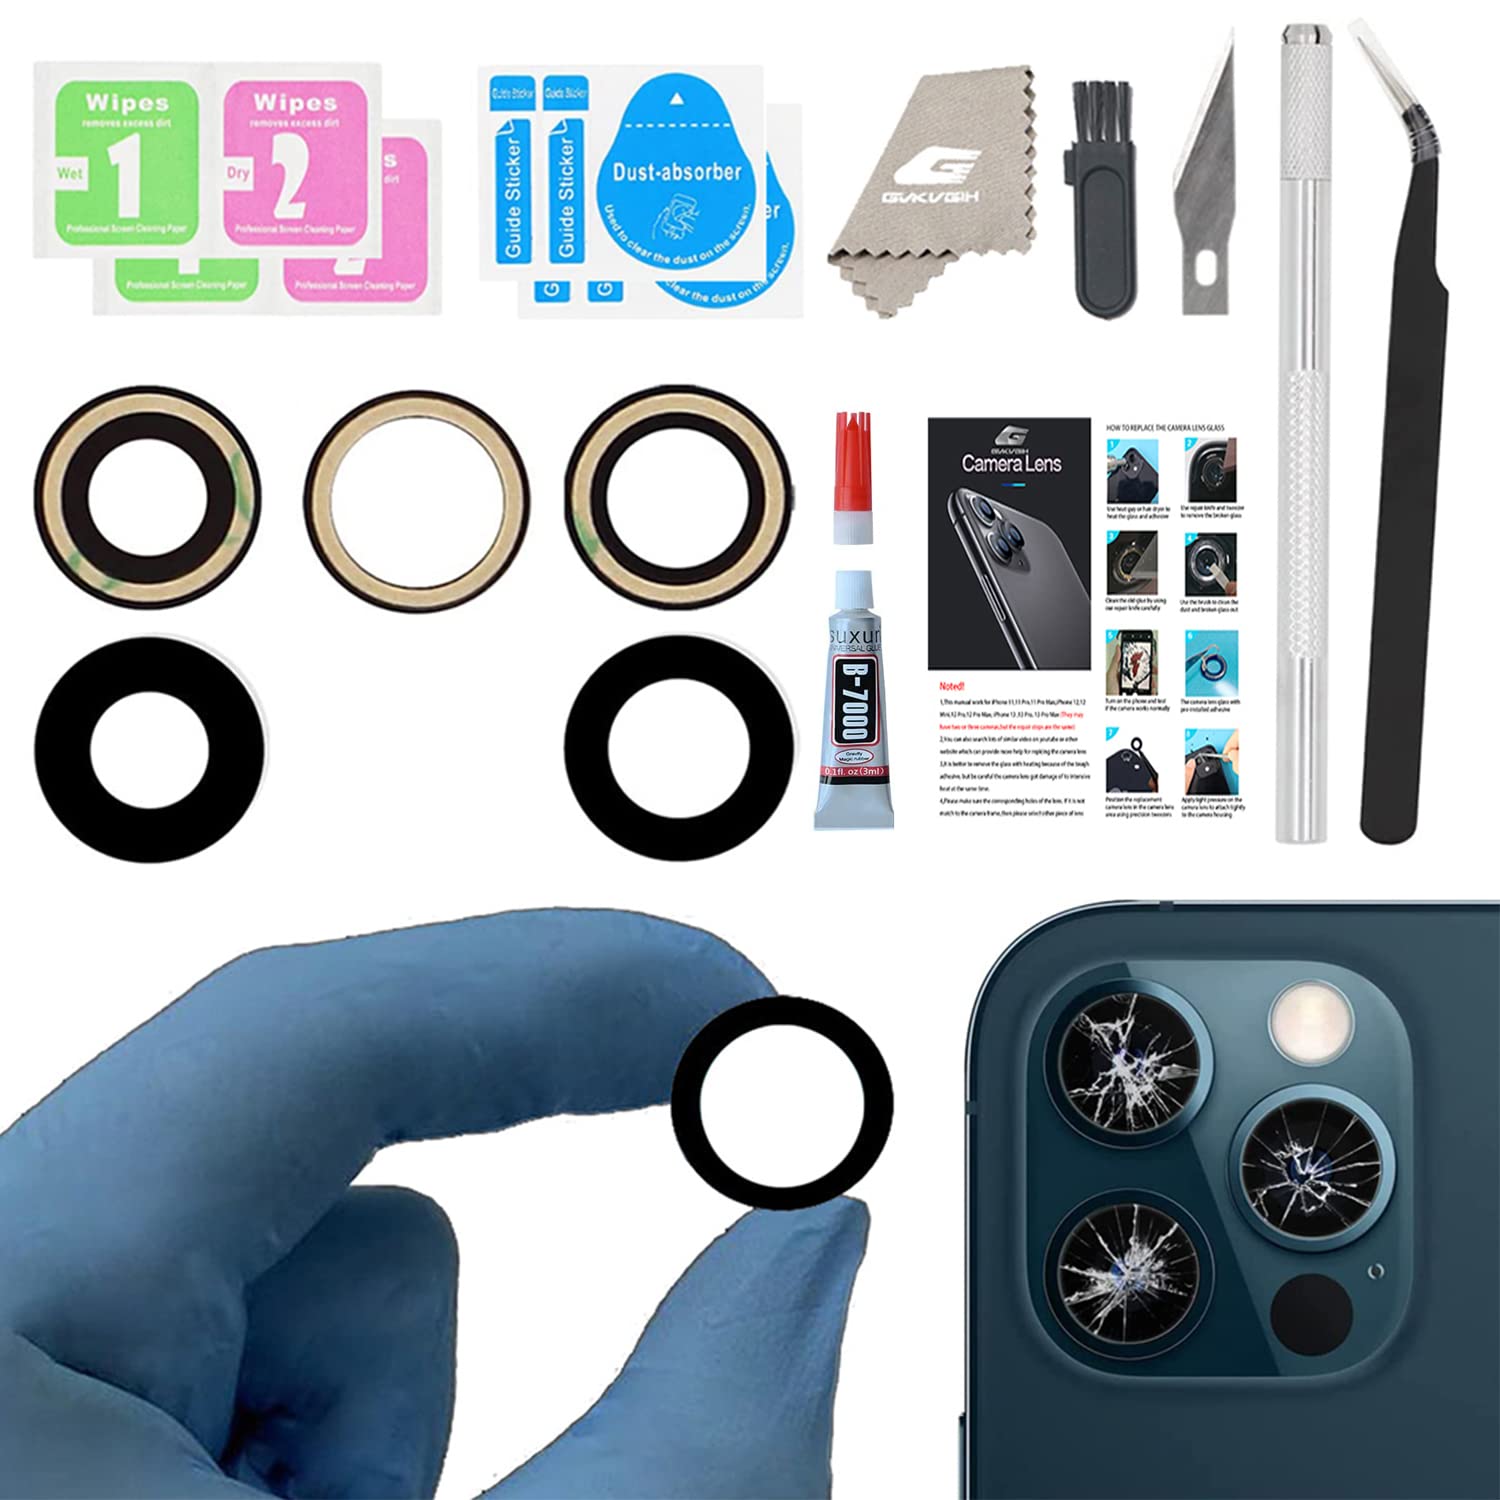 GVKVGIH Camera Lens Glass Replacement For Iphone 13 Pro Max And 13 Pro, Gvkvgih Back Camera Glass Lens Replacement With Pre-Installed Ad